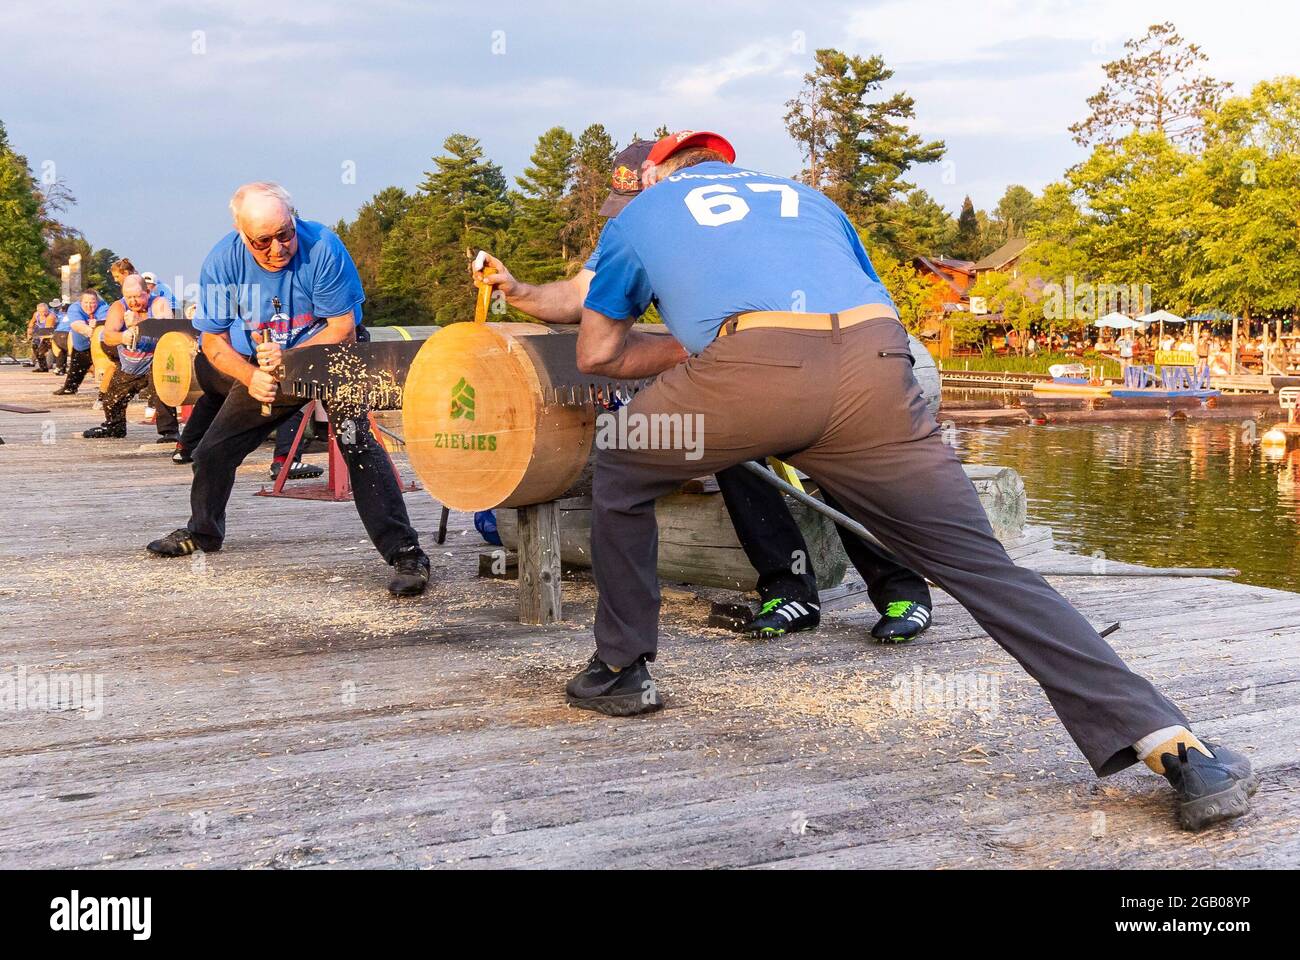 Hayward, USA. 1st Aug, 2021. Competitors use crosscut saws to cut wood during the 61st Lumberjack World Championships in Hayward, Wisconsin, the United States, on July 31, 2021. The championships held here showcased lumberjacks and lumberjills competing in sawing, chopping, speed climbing, log rolling, and boom-running. Credit: Joel Lerner/Xinhua/Alamy Live News Stock Photo